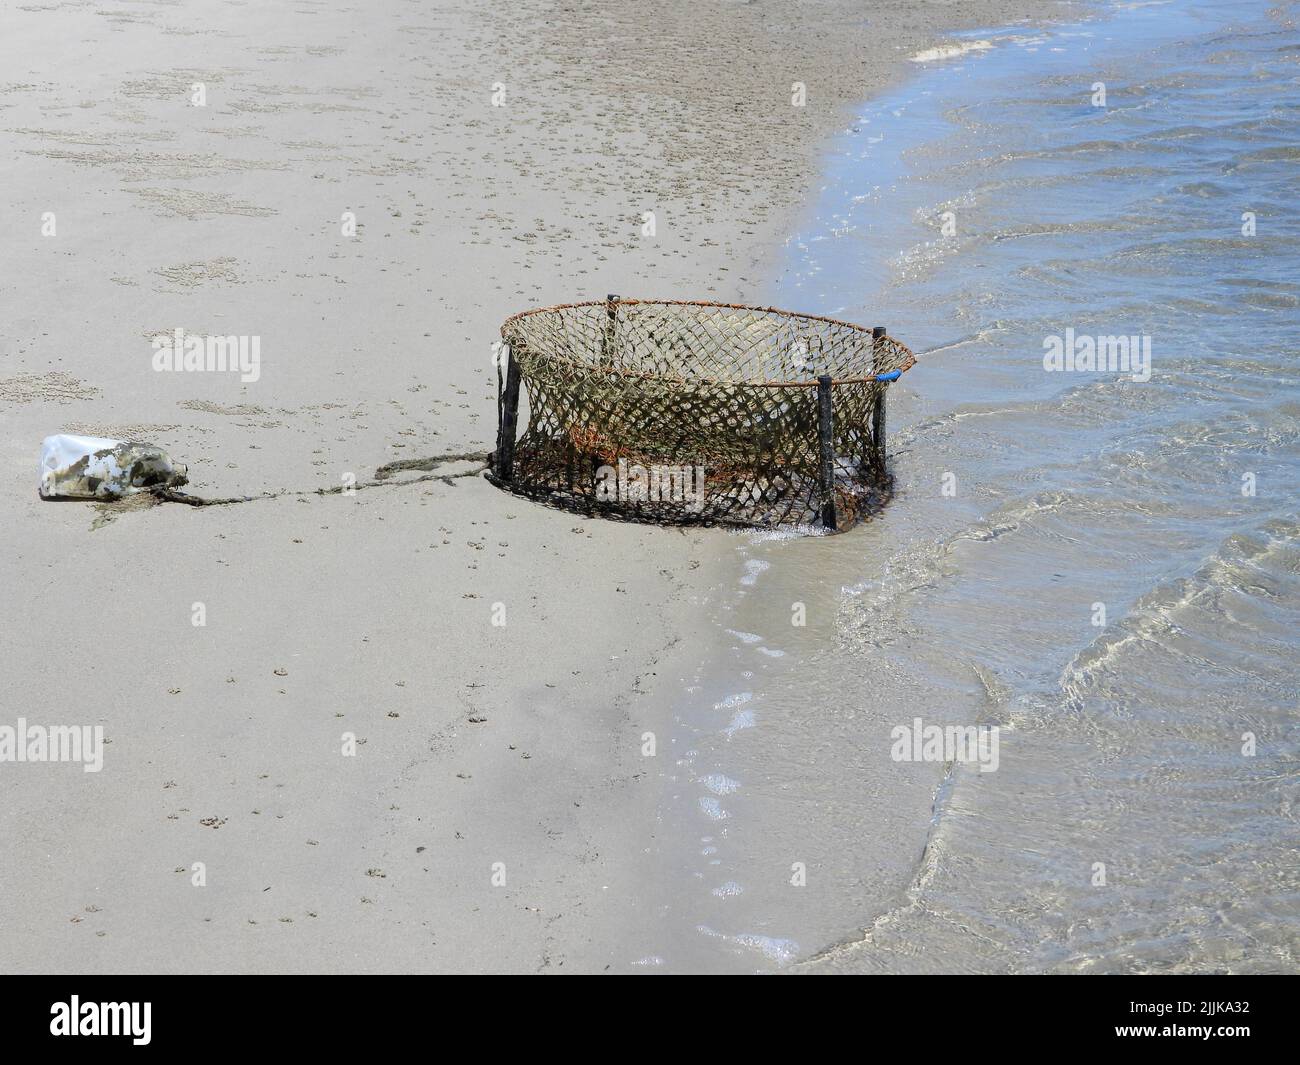 An old crab pot washed ashore, Bribie Island, Queensland, Australia Stock Photo